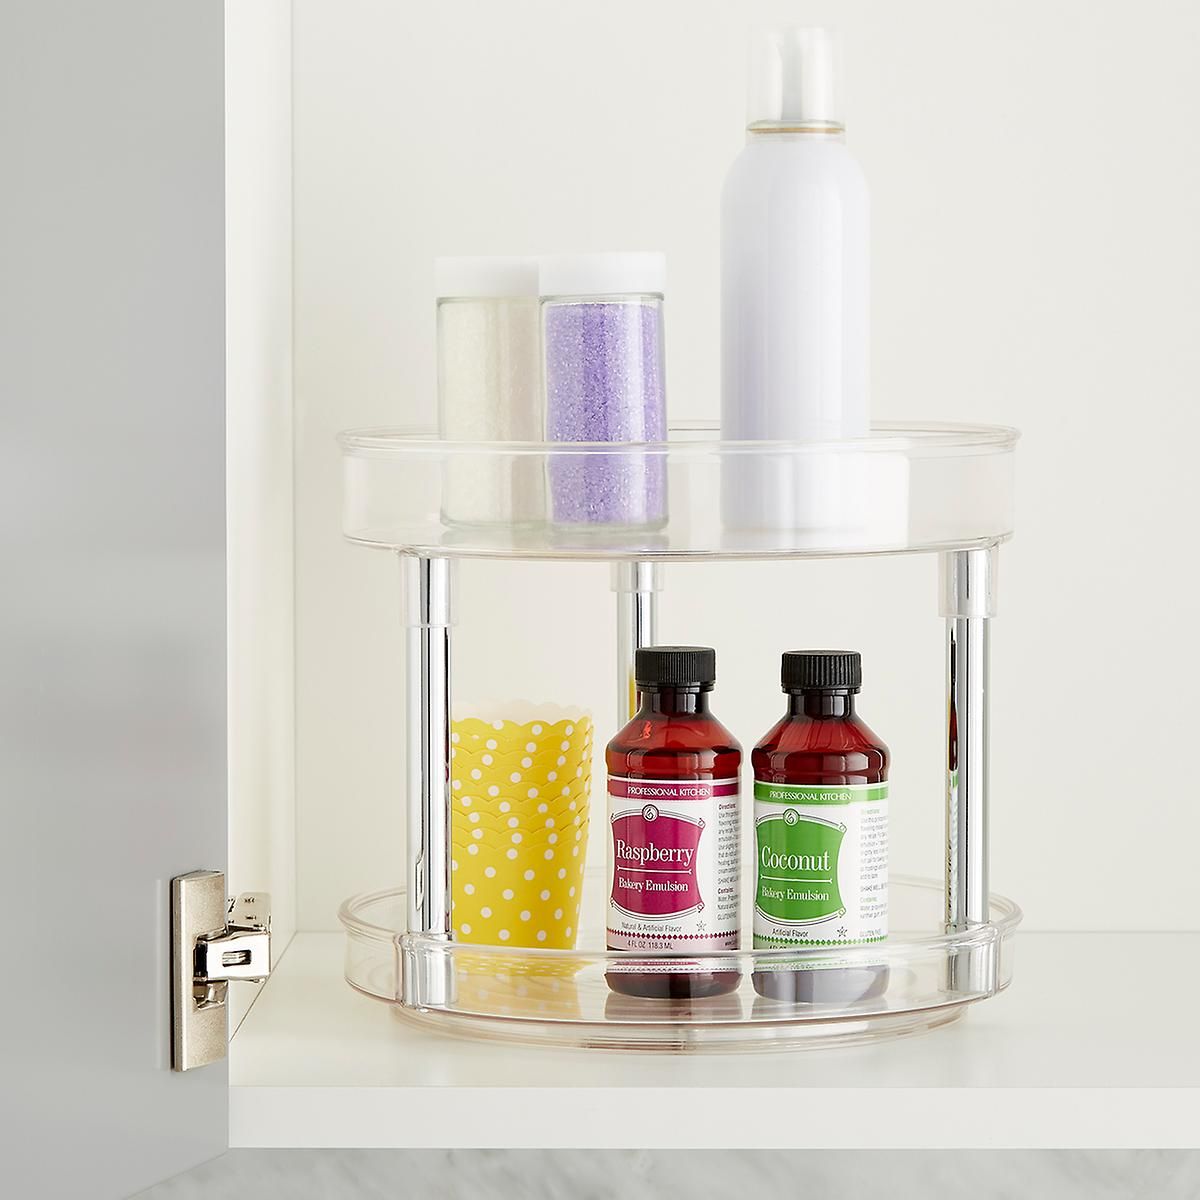 iDesign Linus 2-Tier Lazy Susan | The Container Store